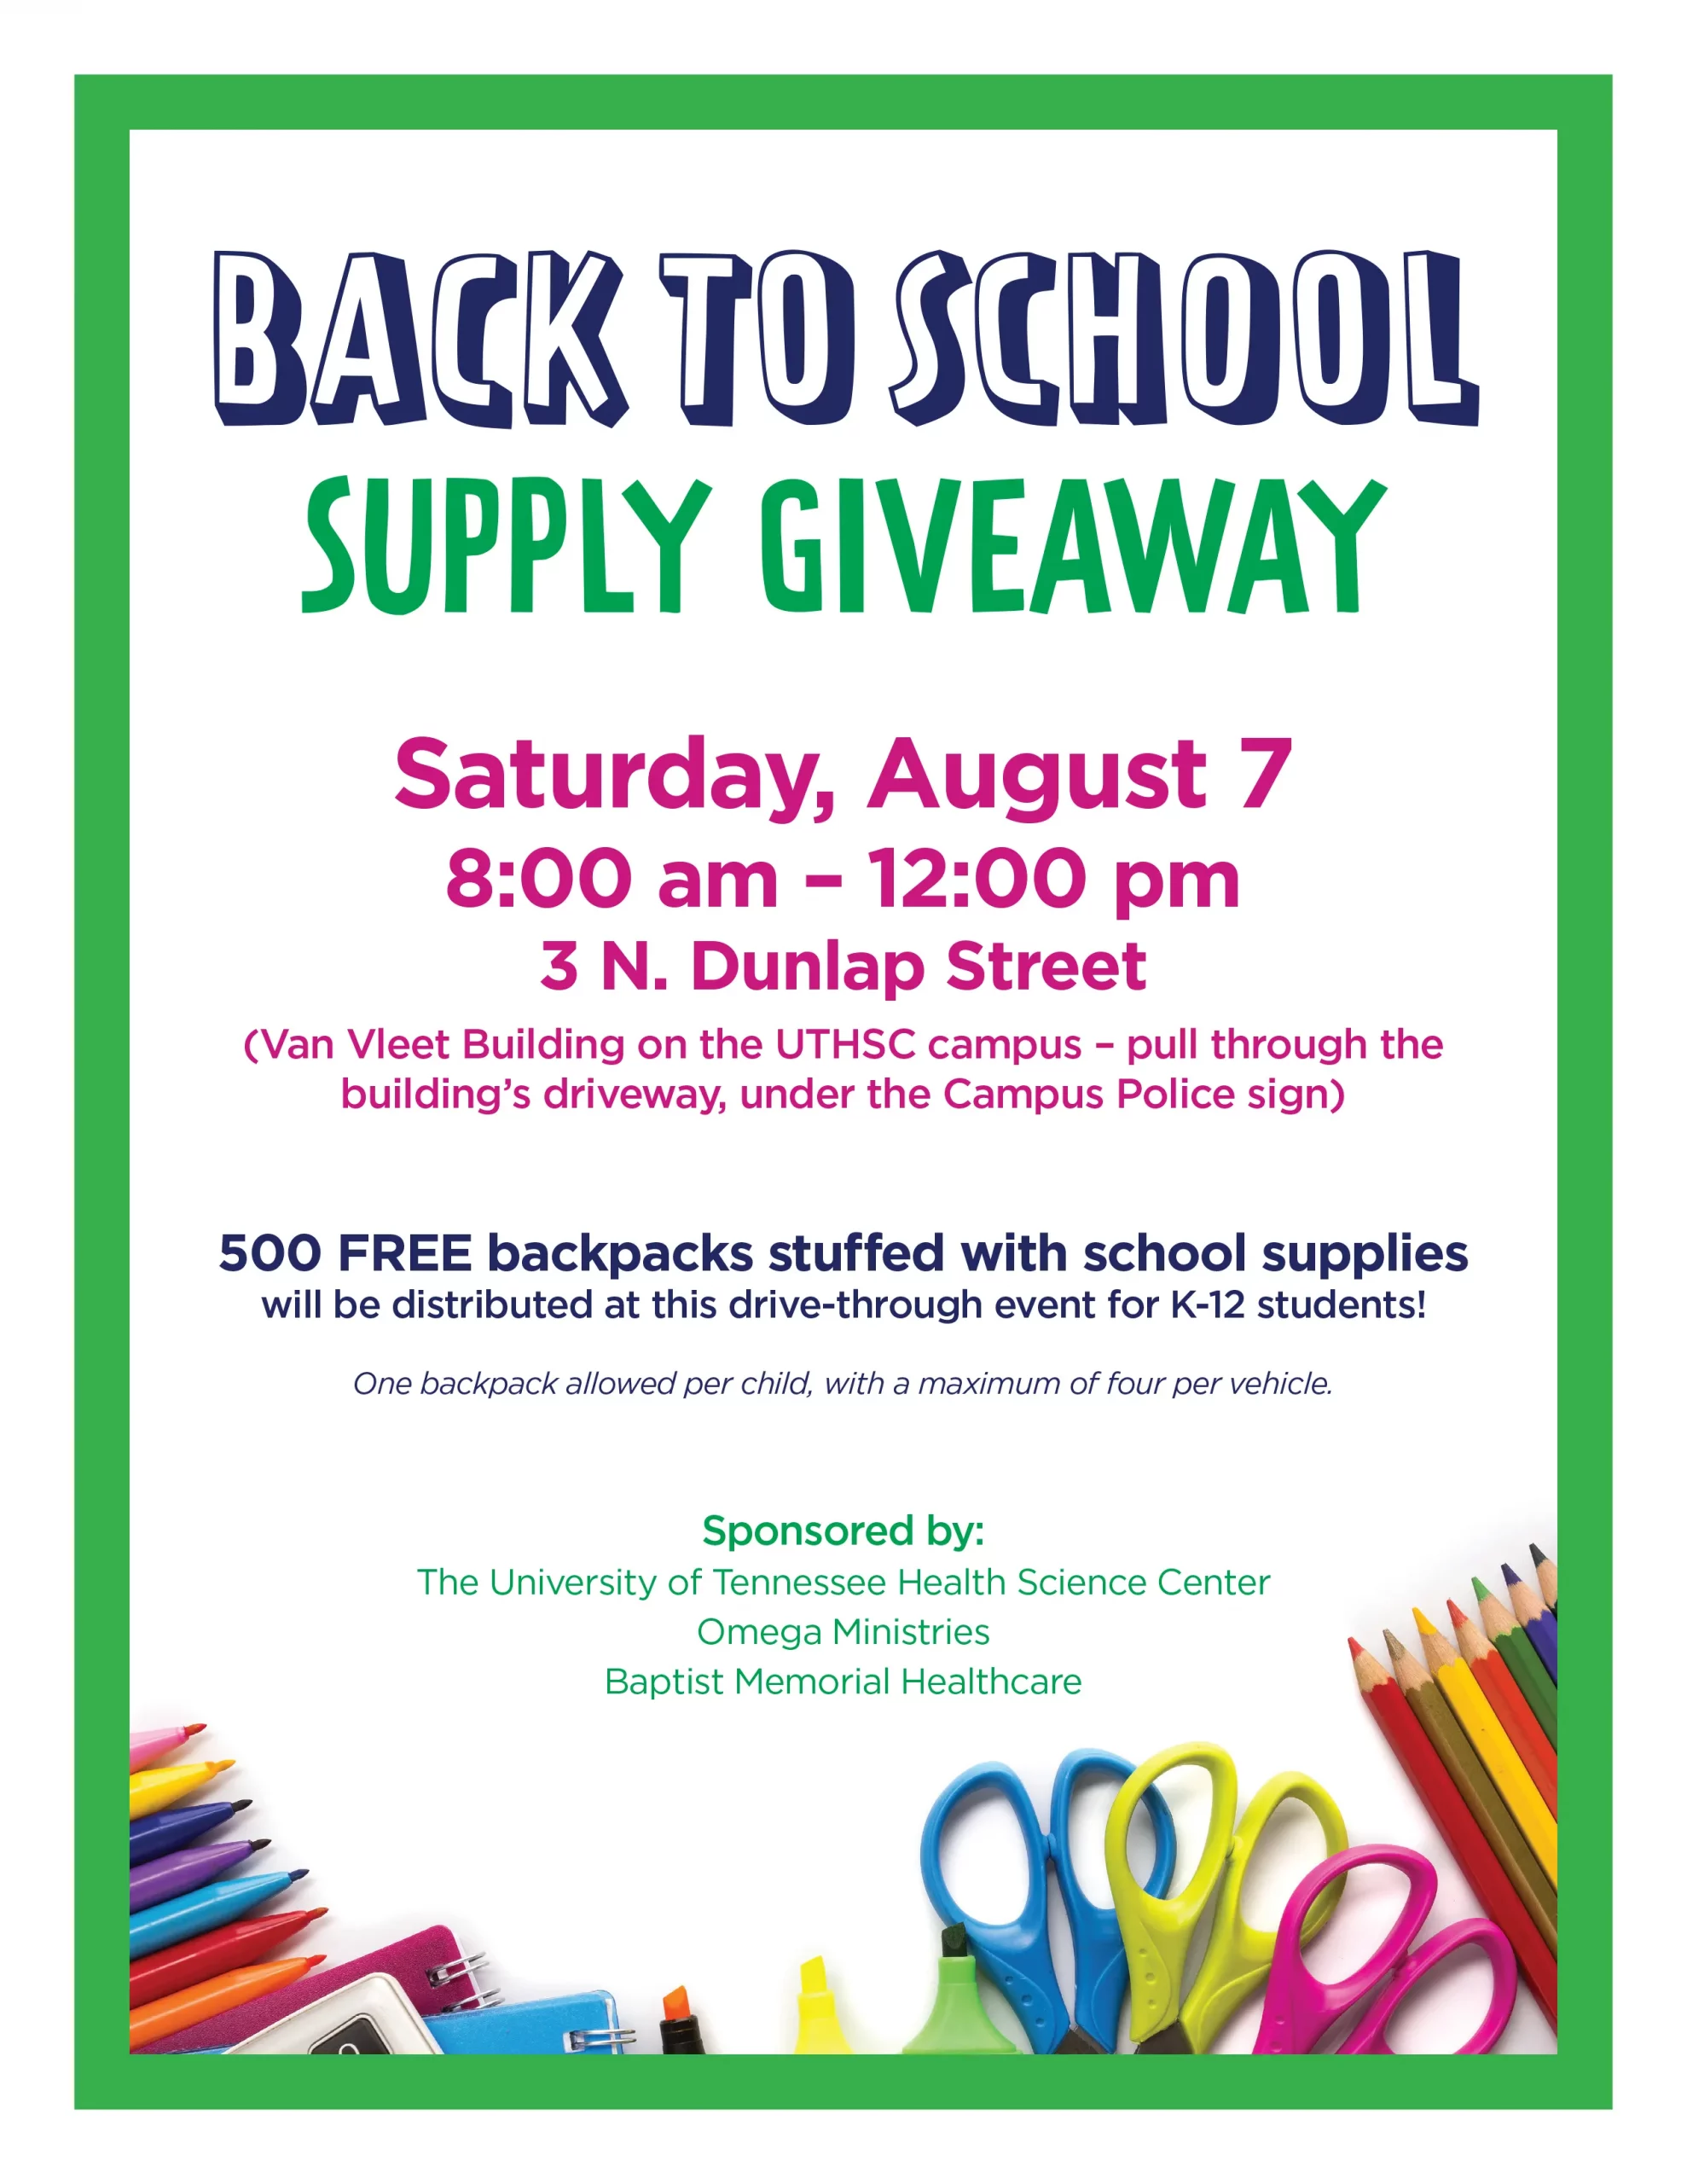 back to school flyer template word, back to school drive flyer template word, free printable back to school flyer templates, editable back to school flyer, printable back to school flyer, back to school flyers examples